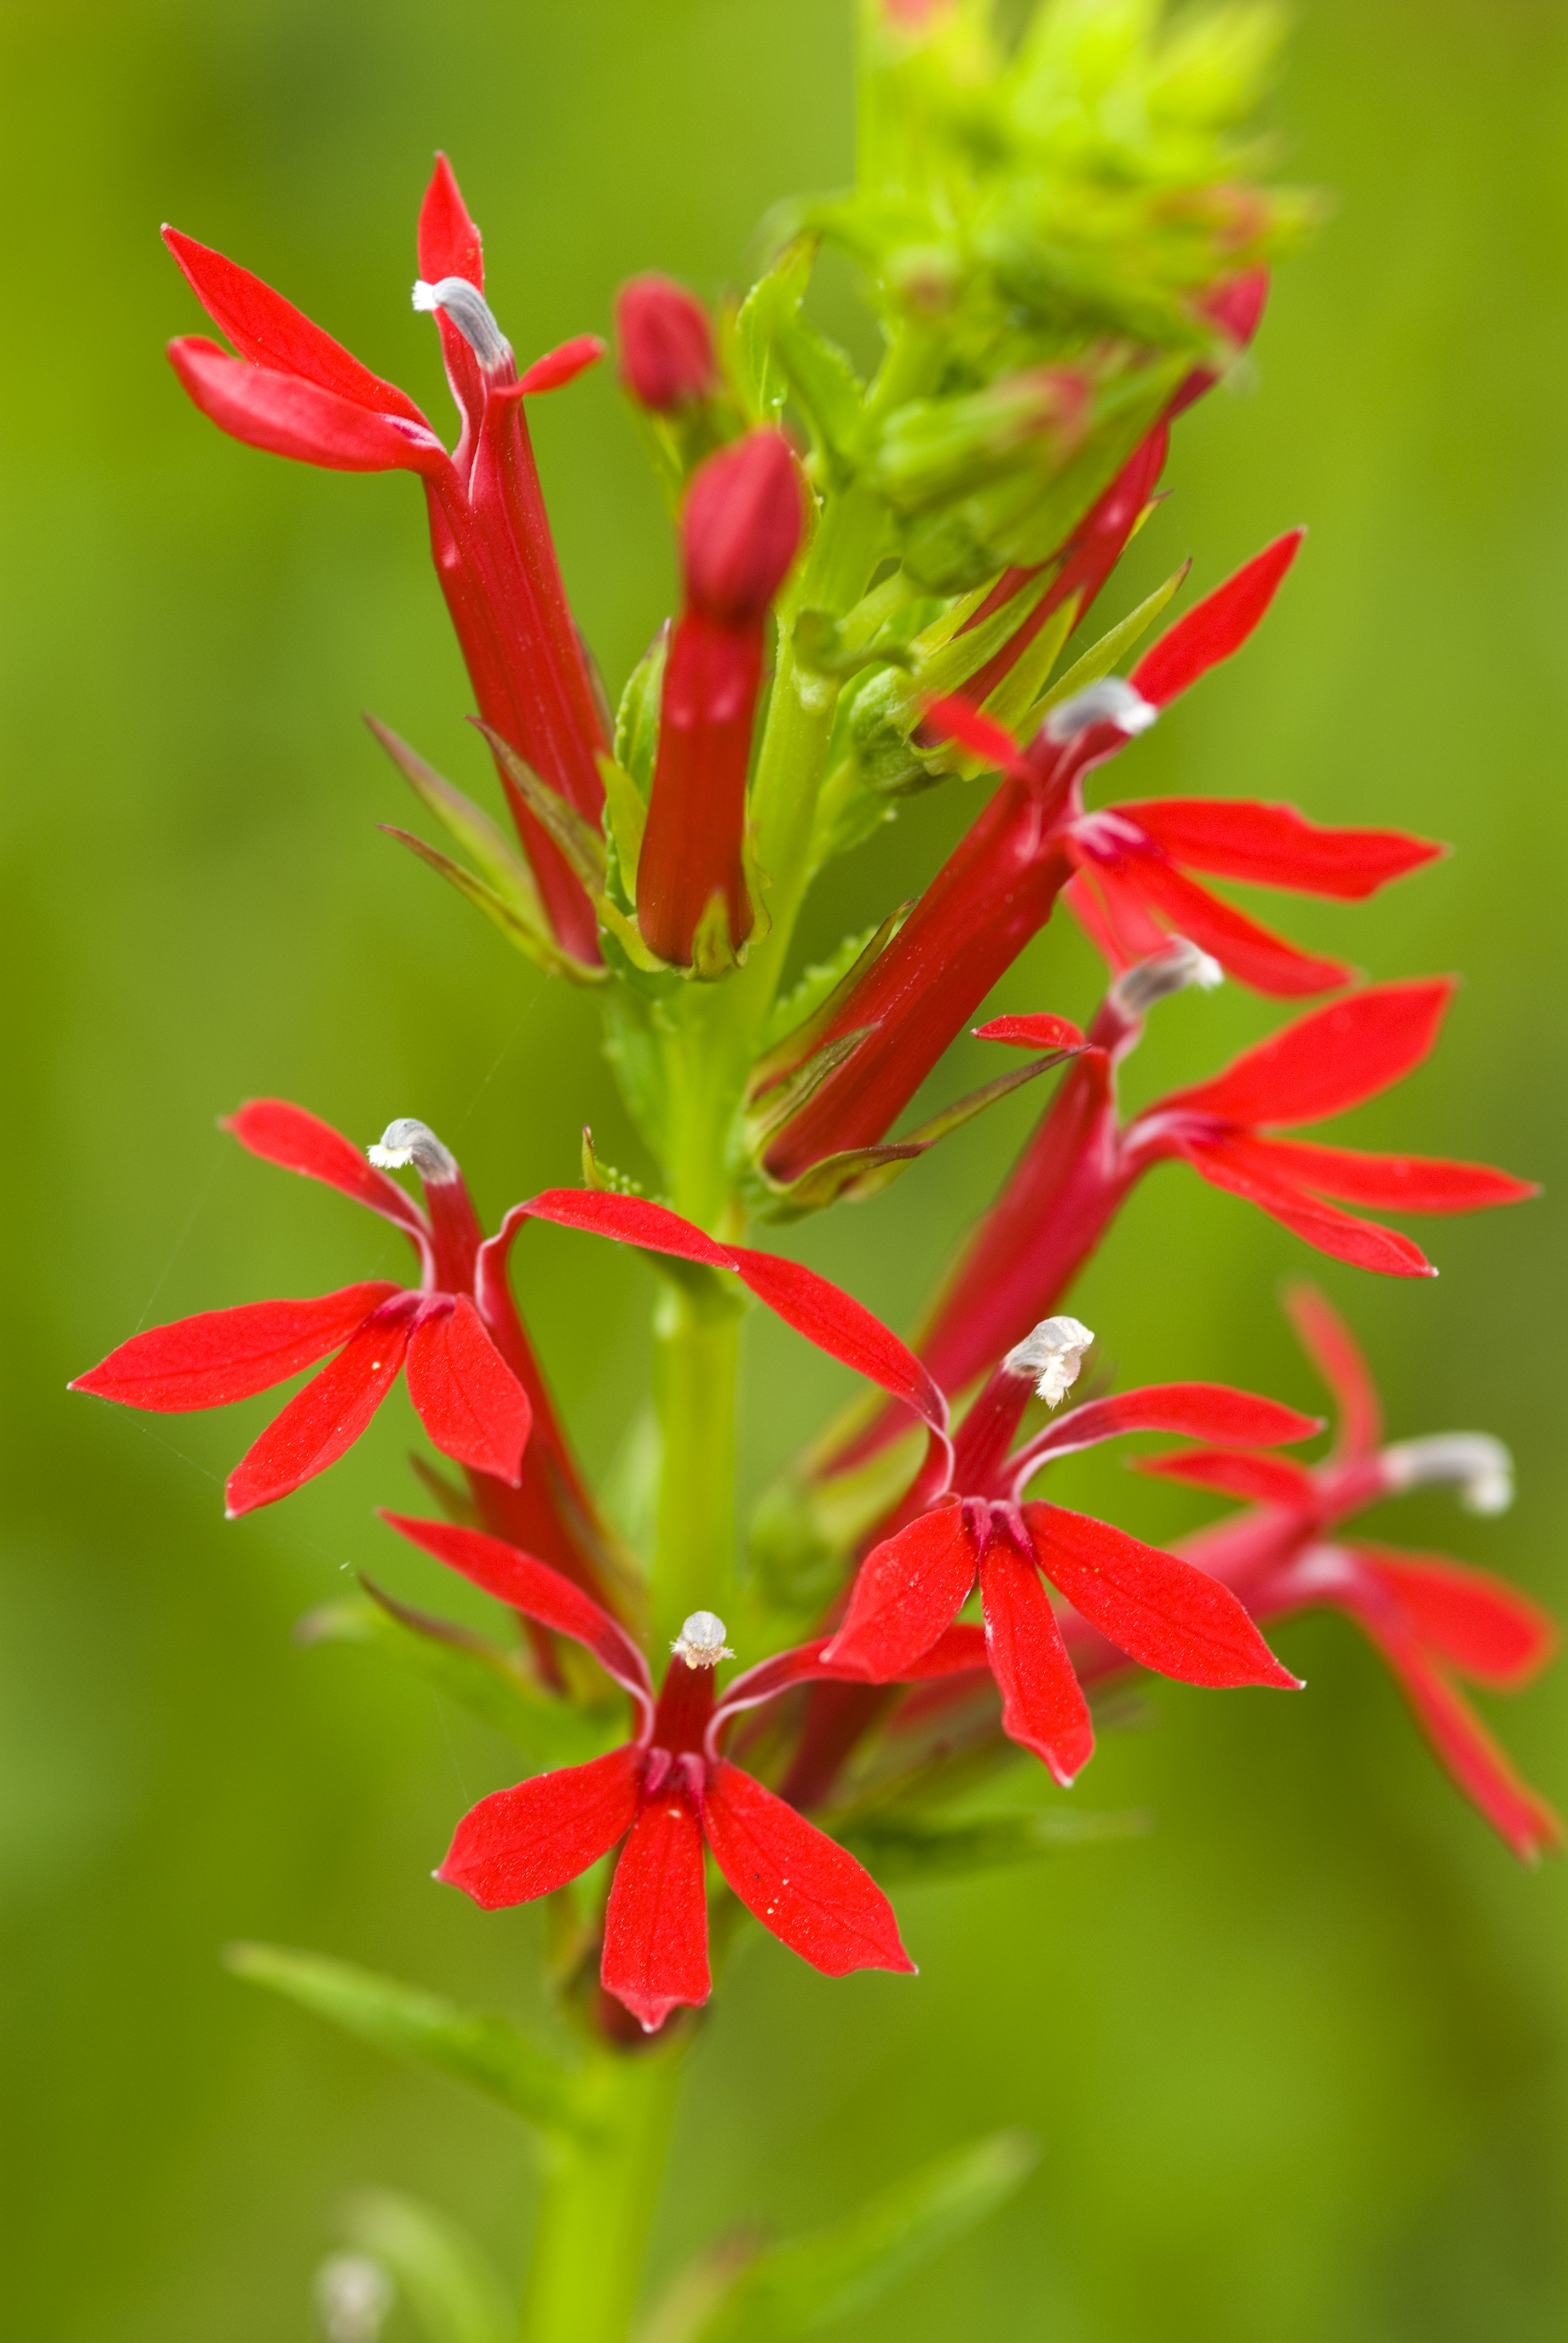 A plant with bright red multi-petal flowers.